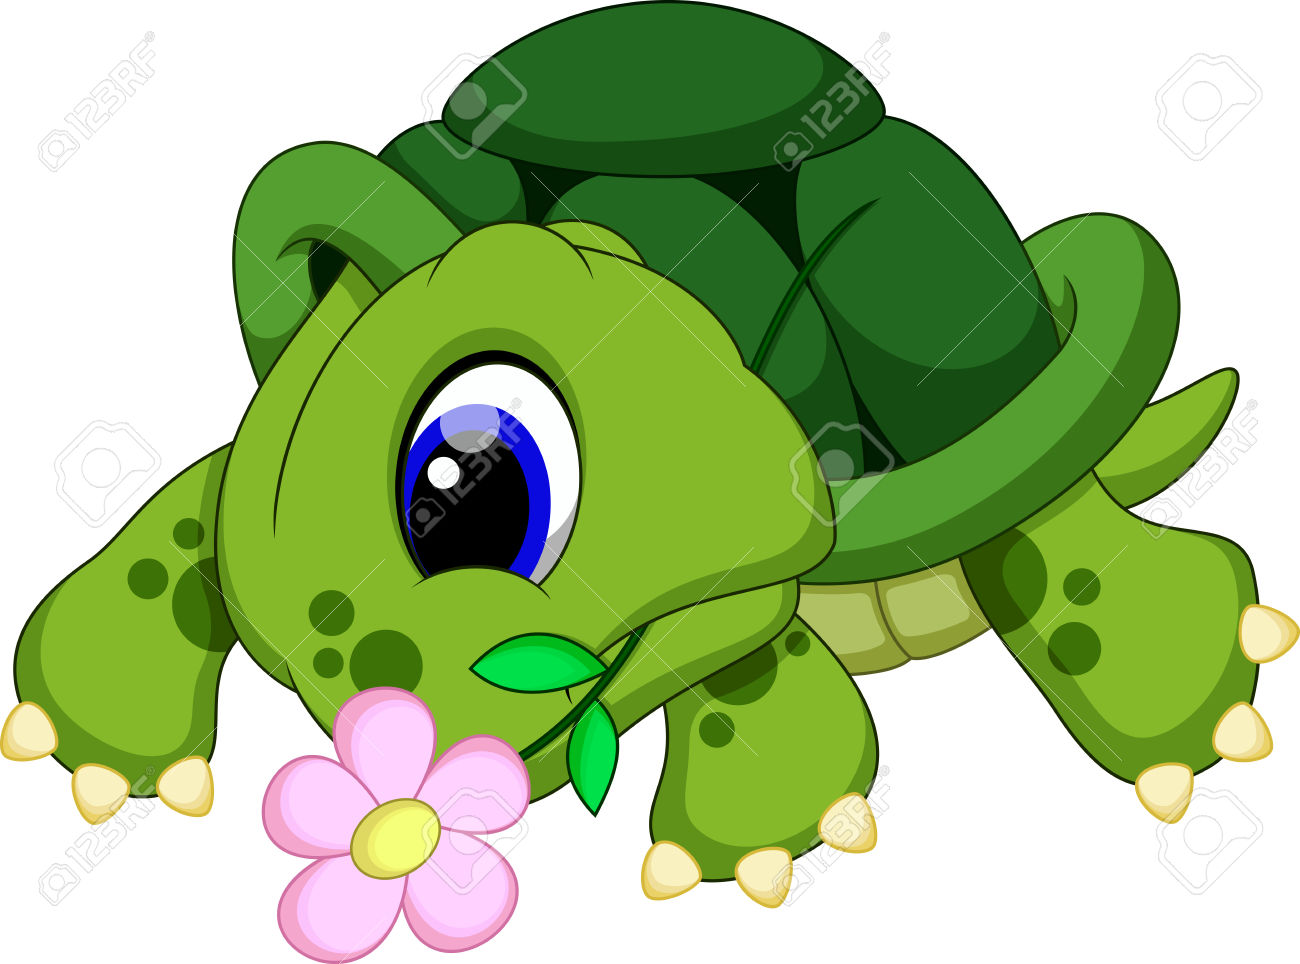 turtle family clipart - photo #19